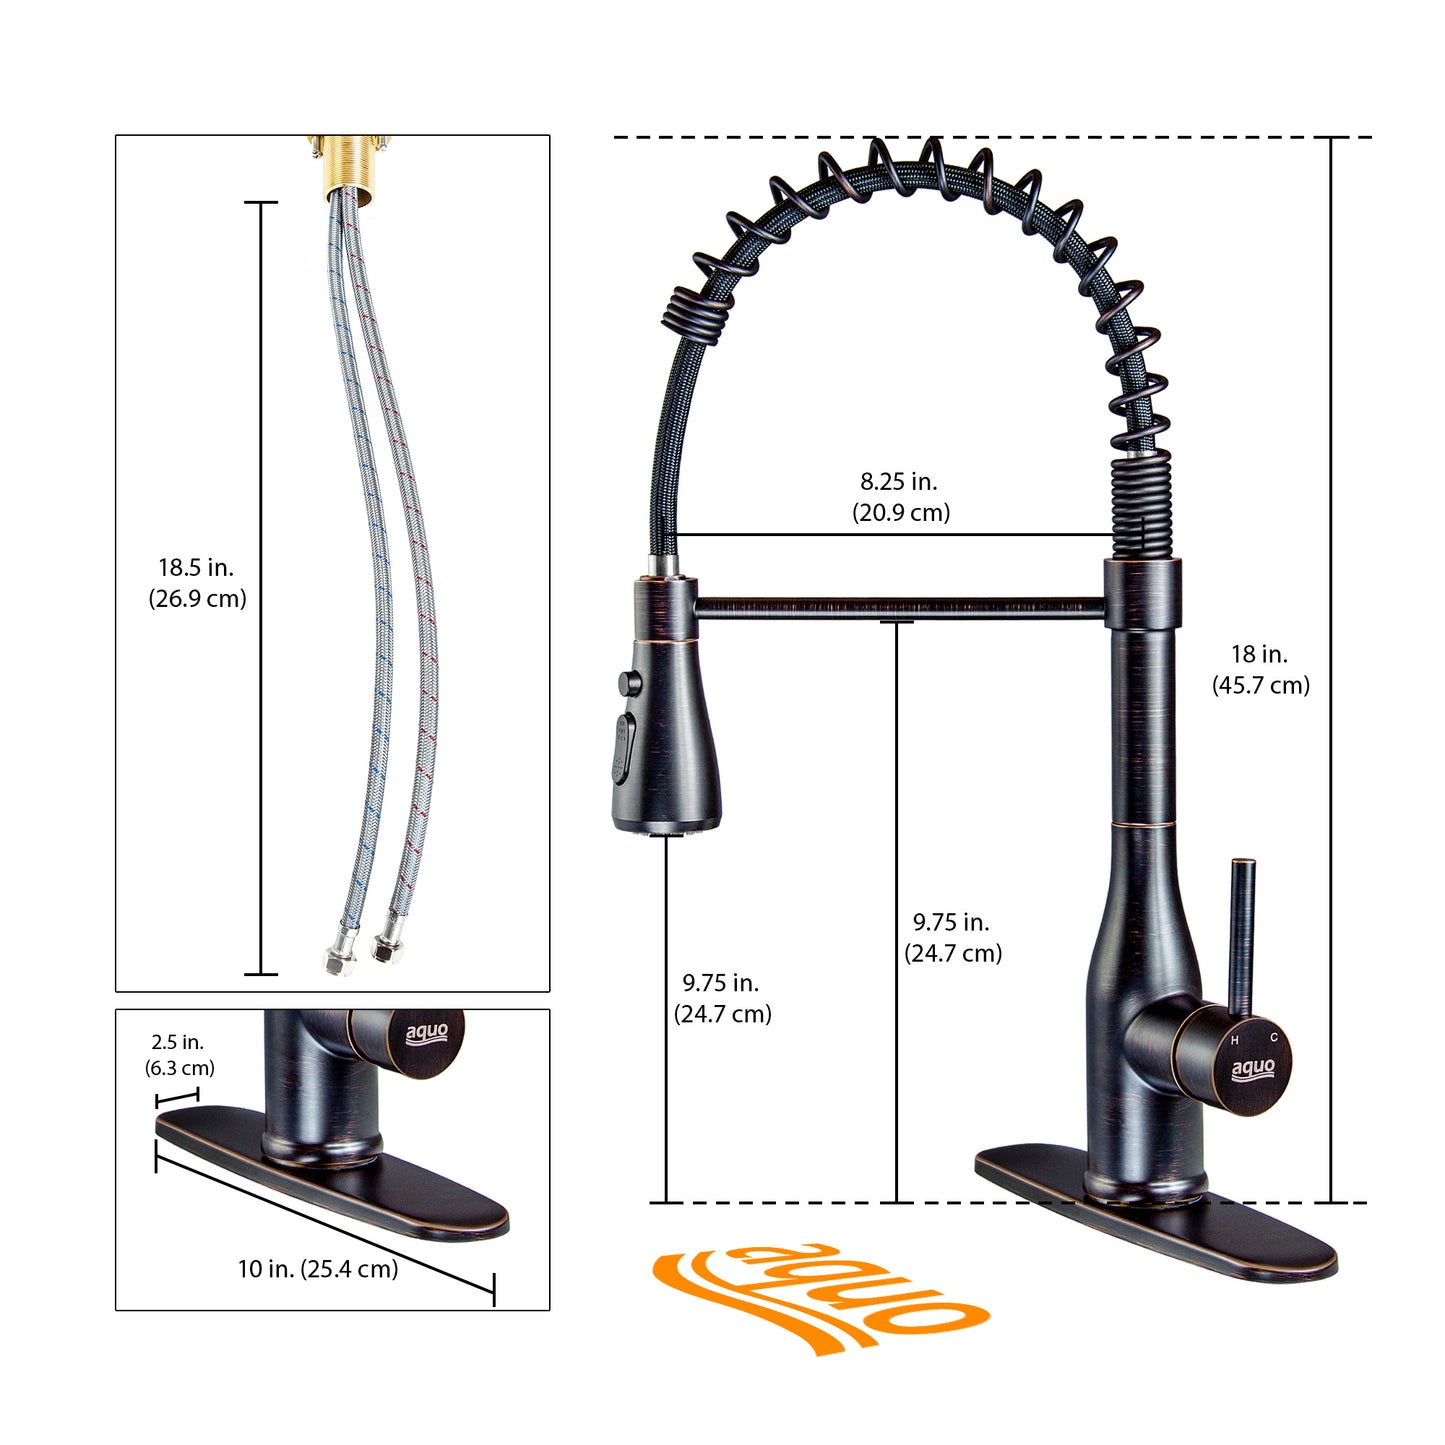 Aquo Kitchen Faucet - This Easy to Install 18" Height Sink Faucet Fits Variety Kitchen Countertops, Nicely Preventing Leaking Issue by Brass Kitchen Sink Faucet Inner Hoses Design, Oil-rubbed Bronze, Model-206007ORB